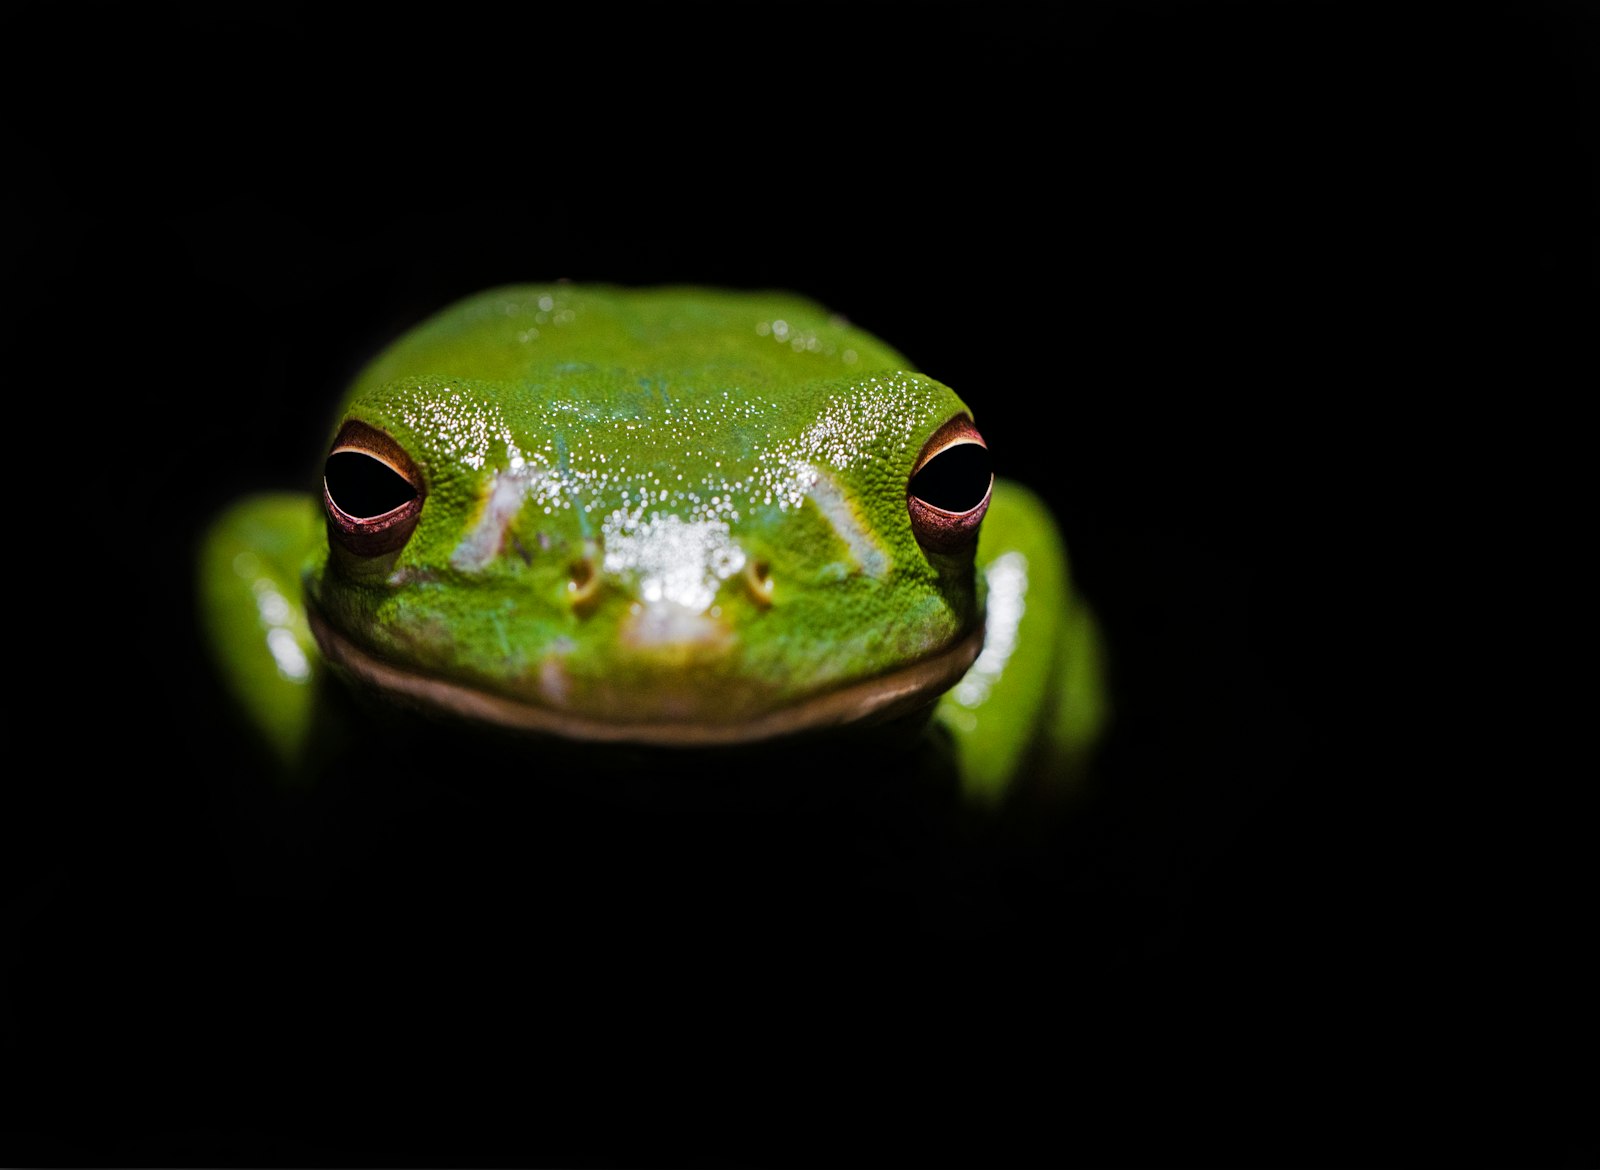 Tamron SP 90mm F2.8 Di VC USD 1:1 Macro (F004) sample photo. Green frog in the photography